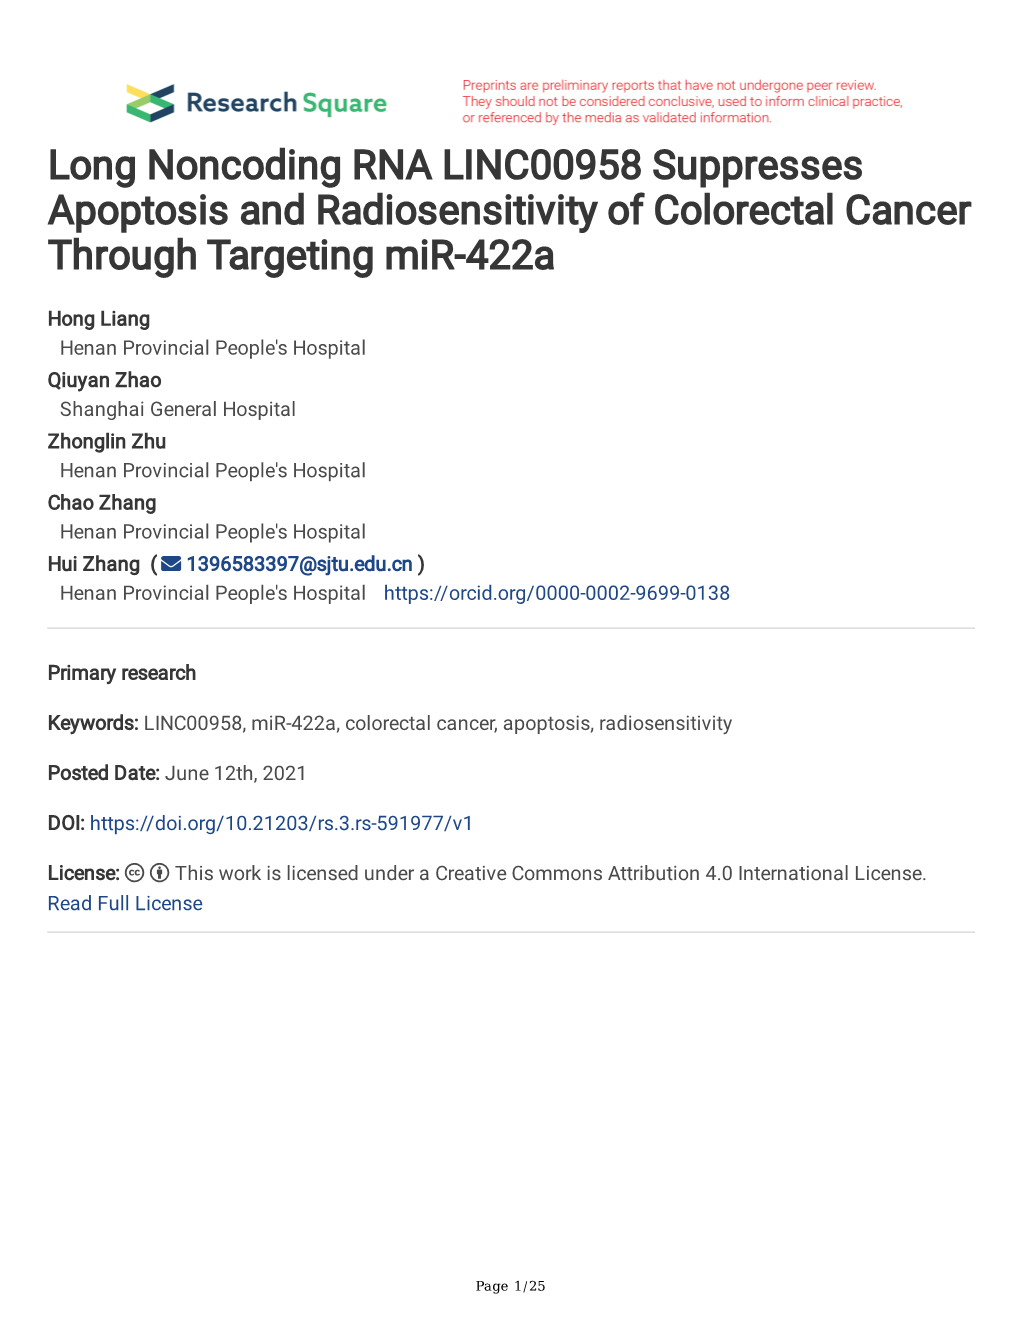 Long Noncoding RNA LINC00958 Suppresses Apoptosis and Radiosensitivity of Colorectal Cancer Through Targeting Mir-422A